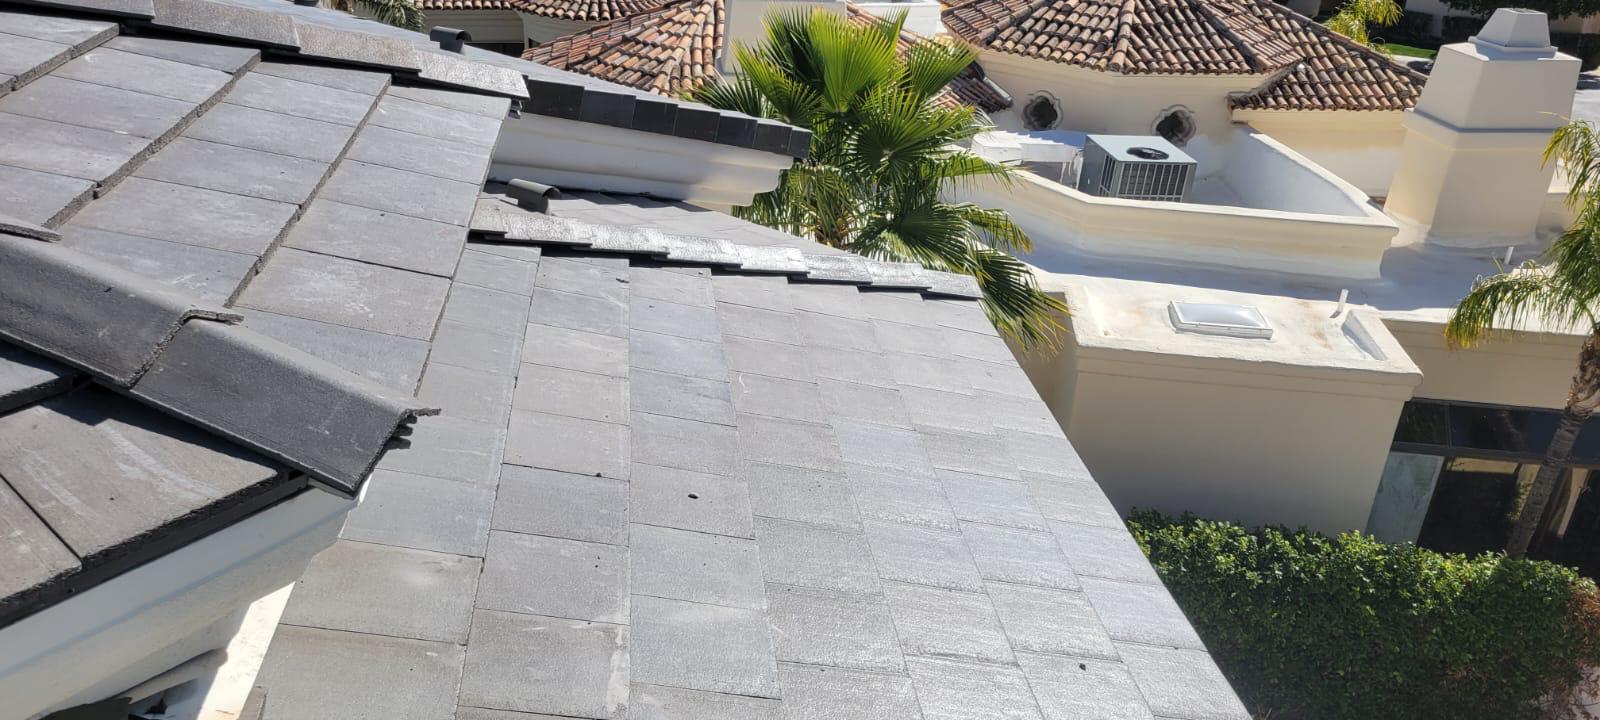 A house in Fountain Hills with a black tile roof receives re-roofing.